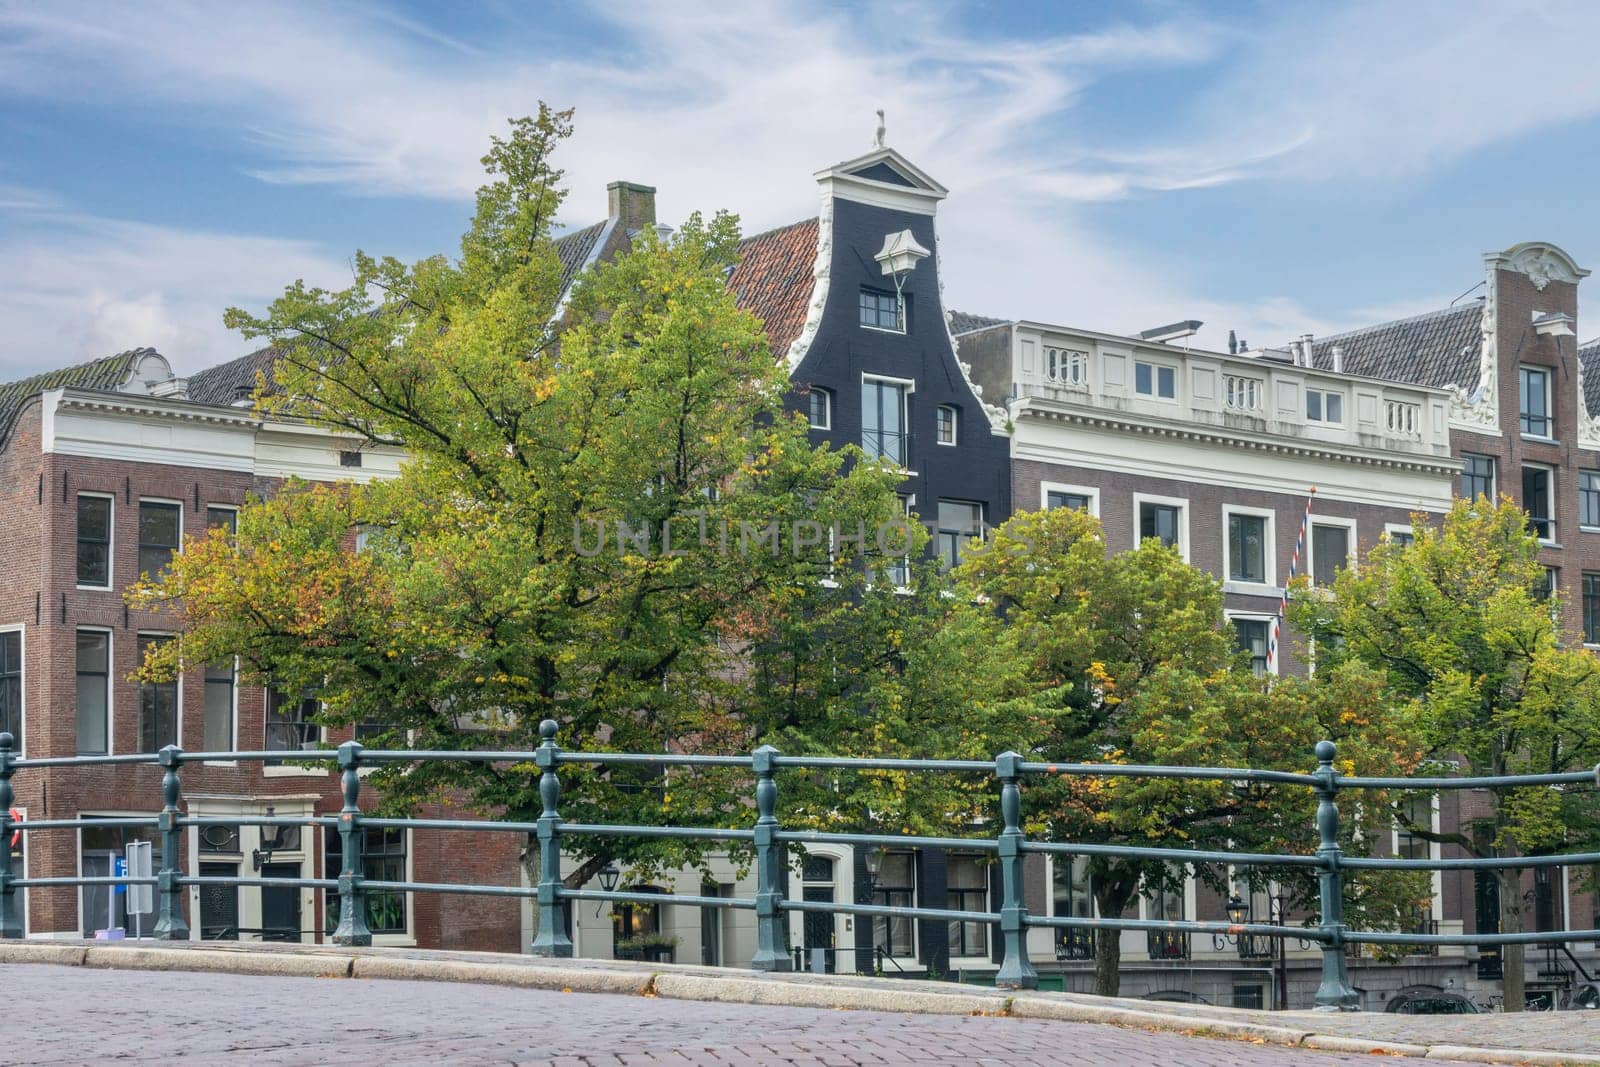 Typical Buildings on the Canal Embankment in Amsterdam by Ruckzack